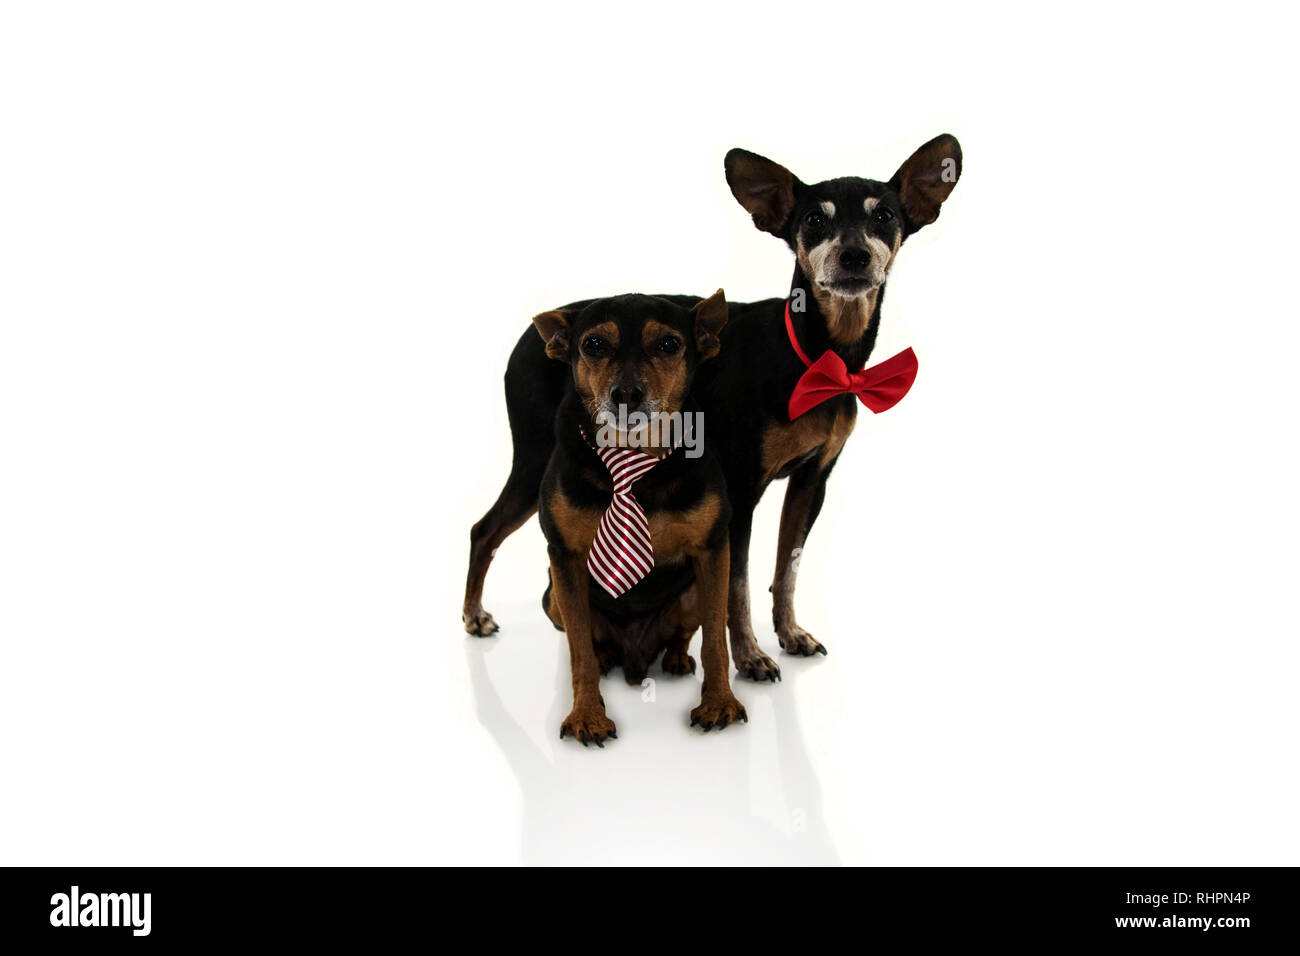 TWO ELDERLY PINSCHERS DOGS WITH RED BOW TIE ISOLATED ON WHITE BACKGROUND. Stock Photo